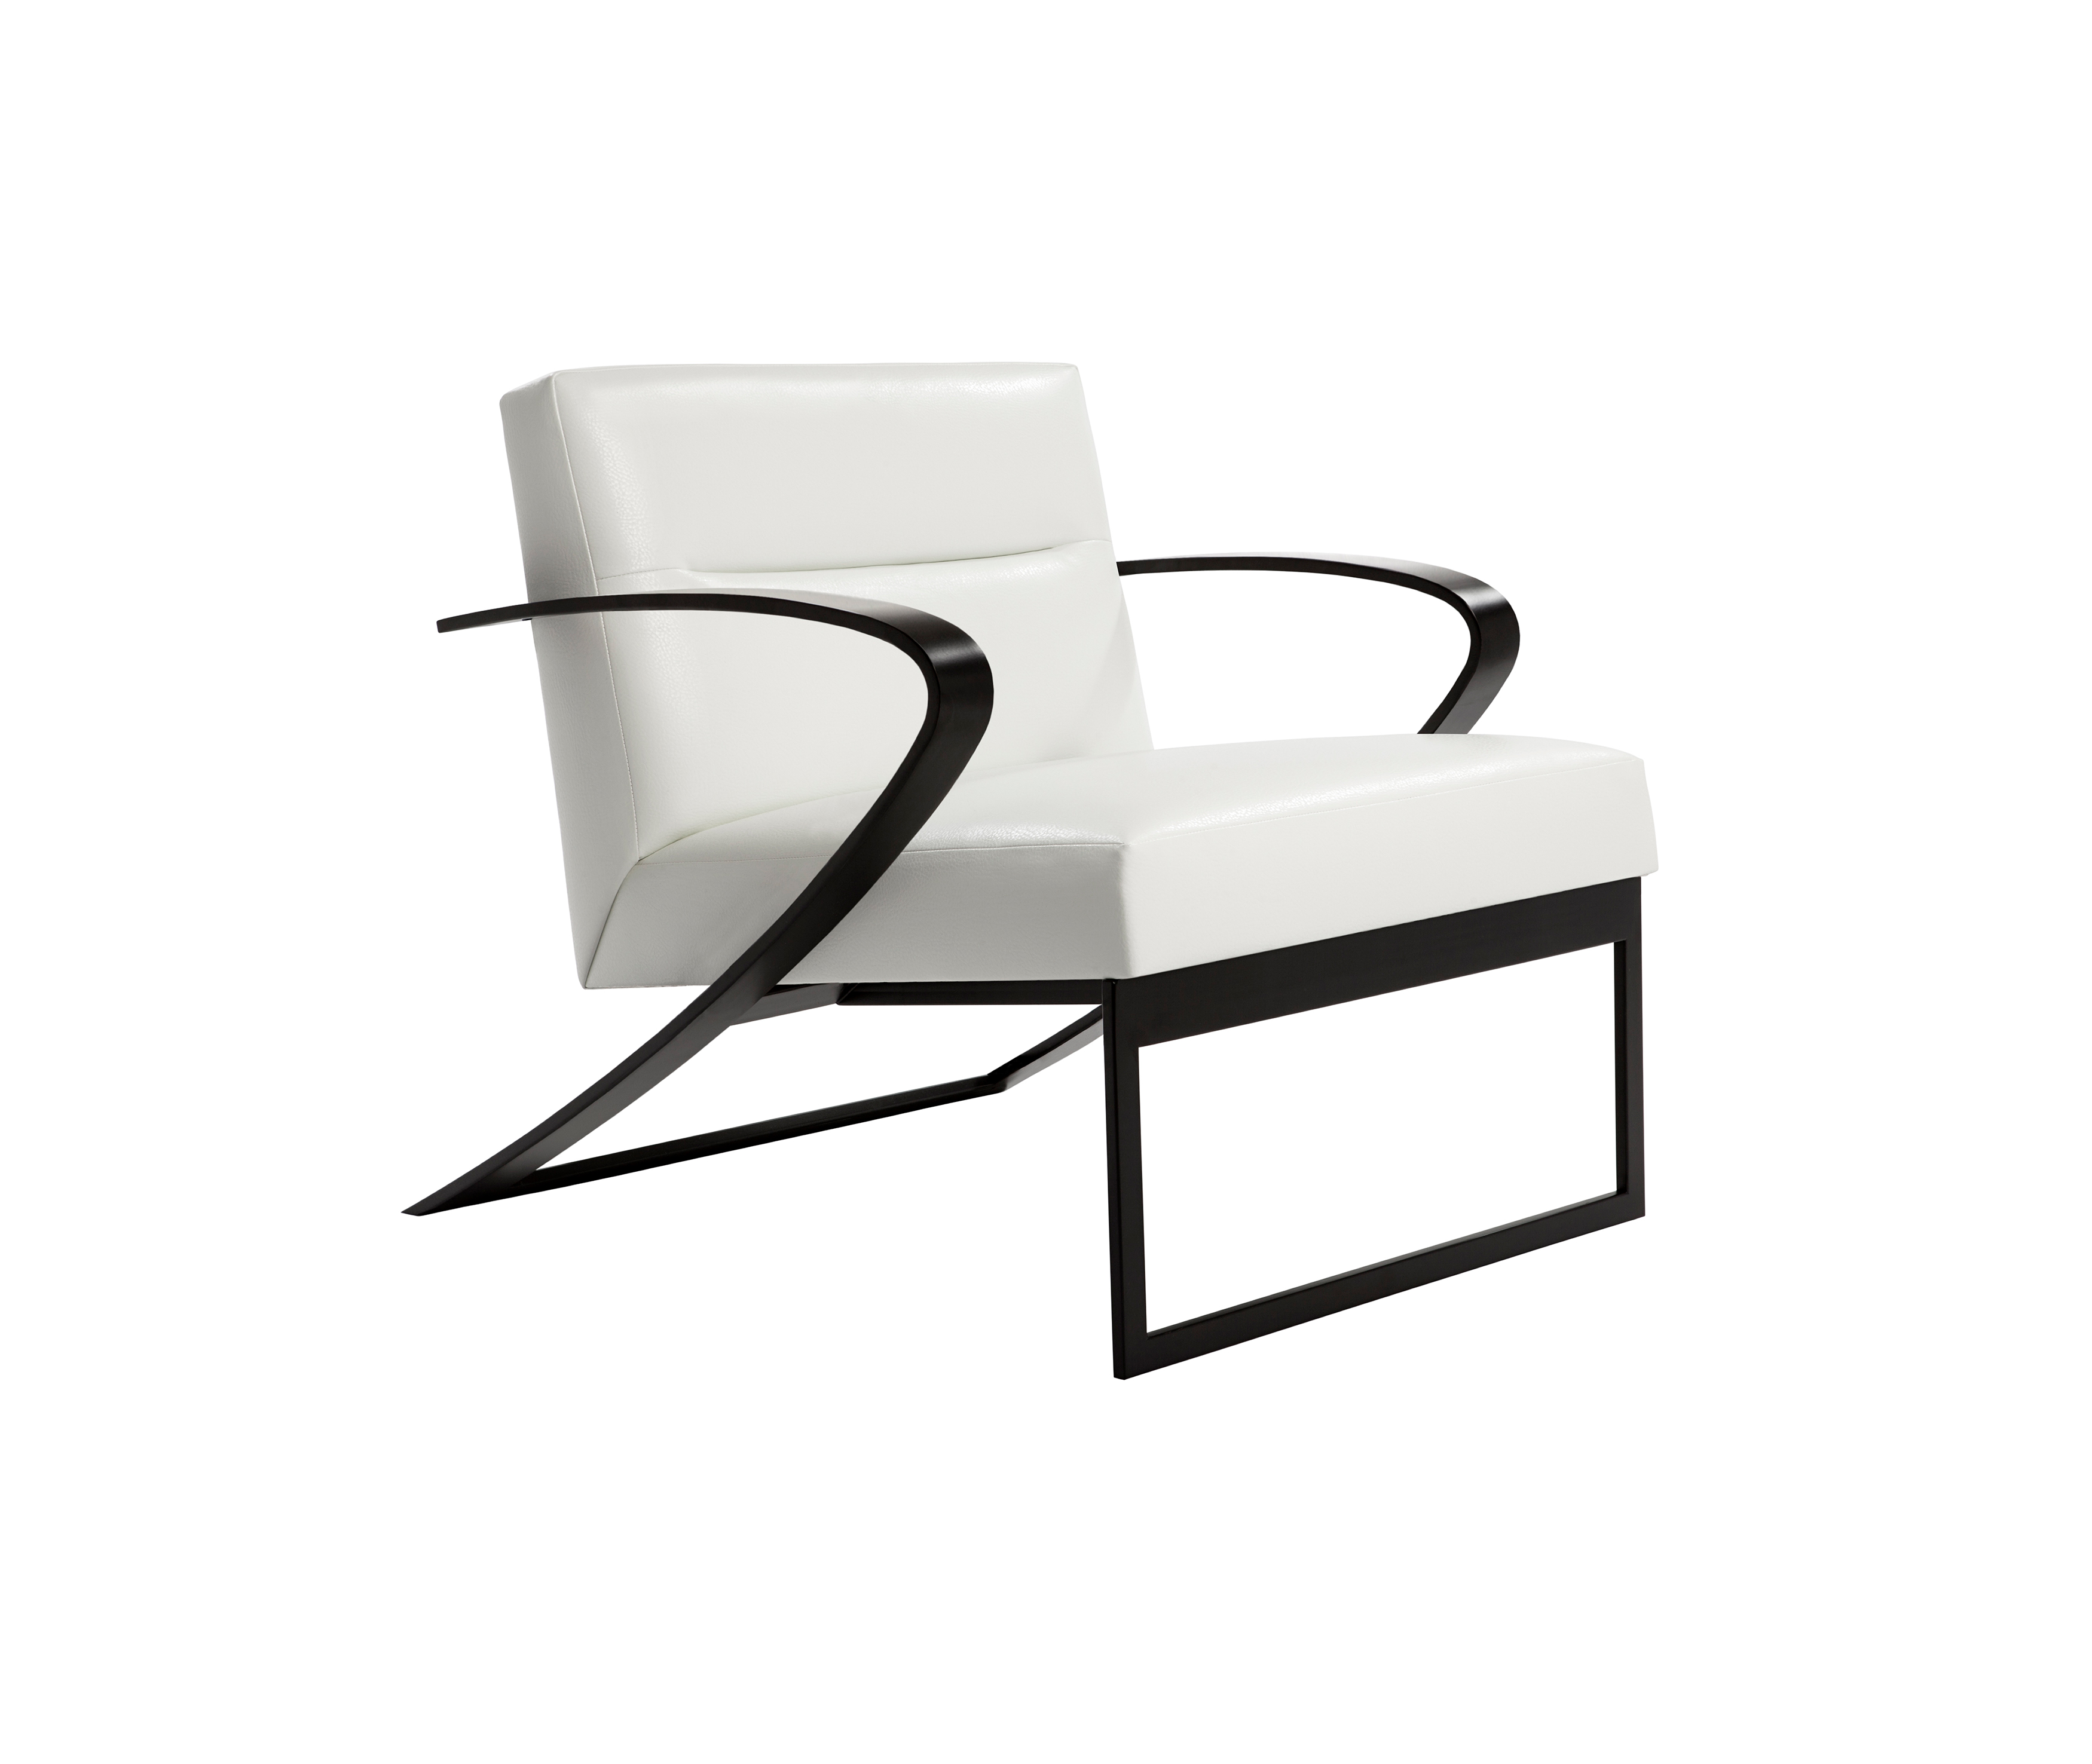 Dennis Miller_Impala Chair_int_products_2